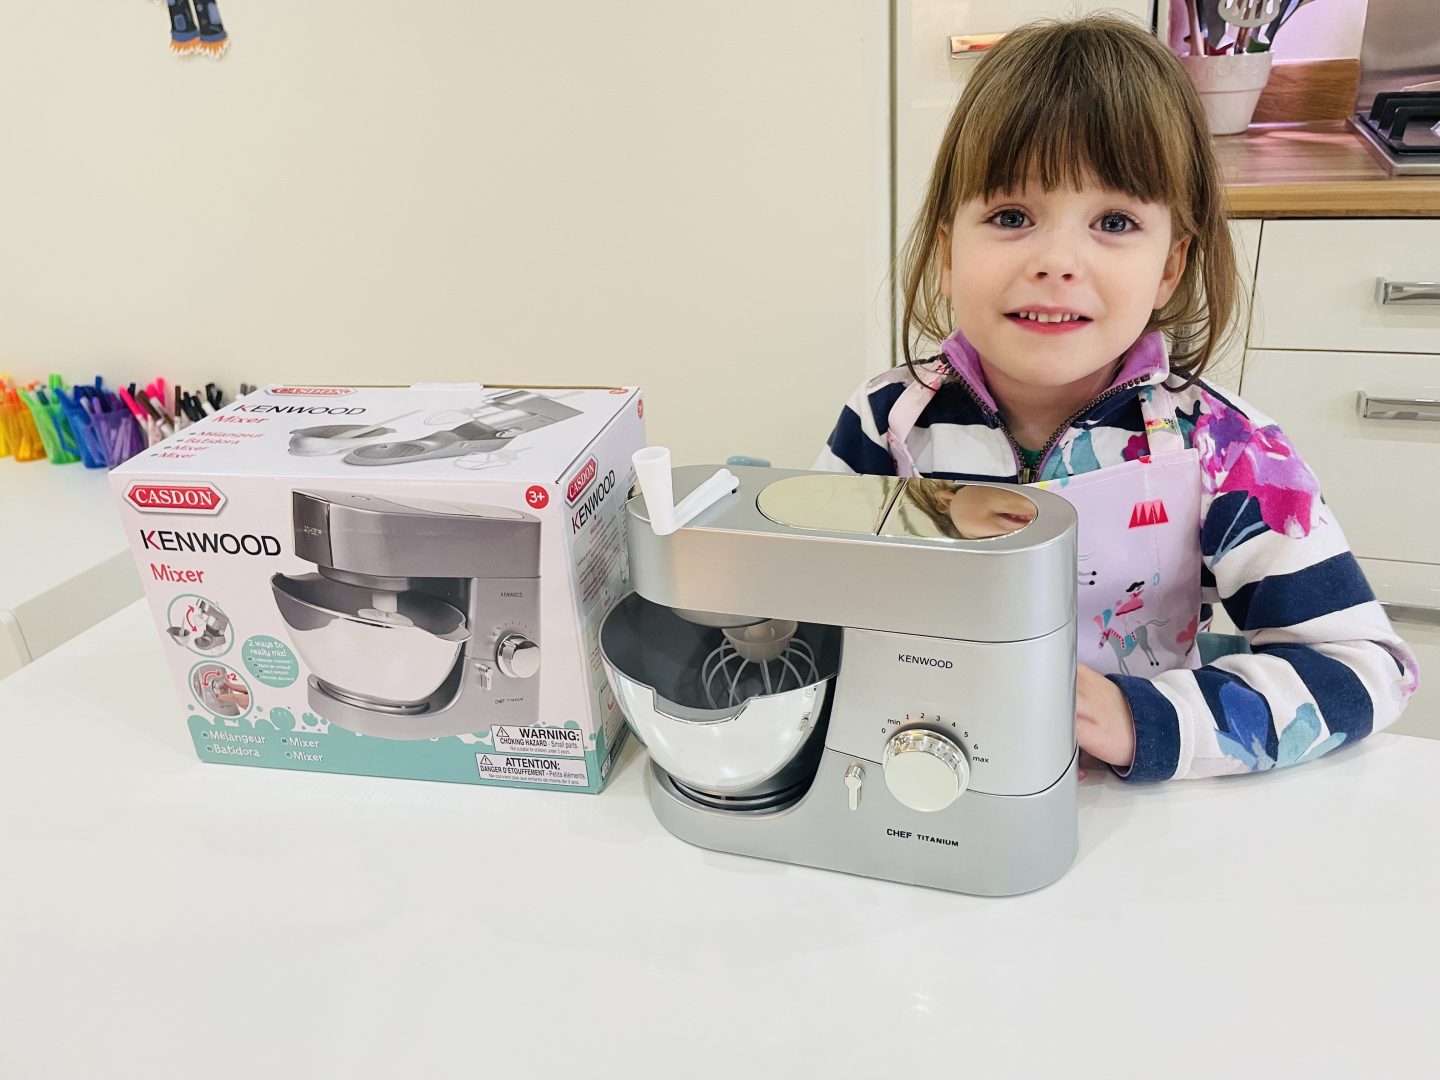 Casdon KENWOOD Toy Mixer and Casdon Dyson cord-free Vacuum Review